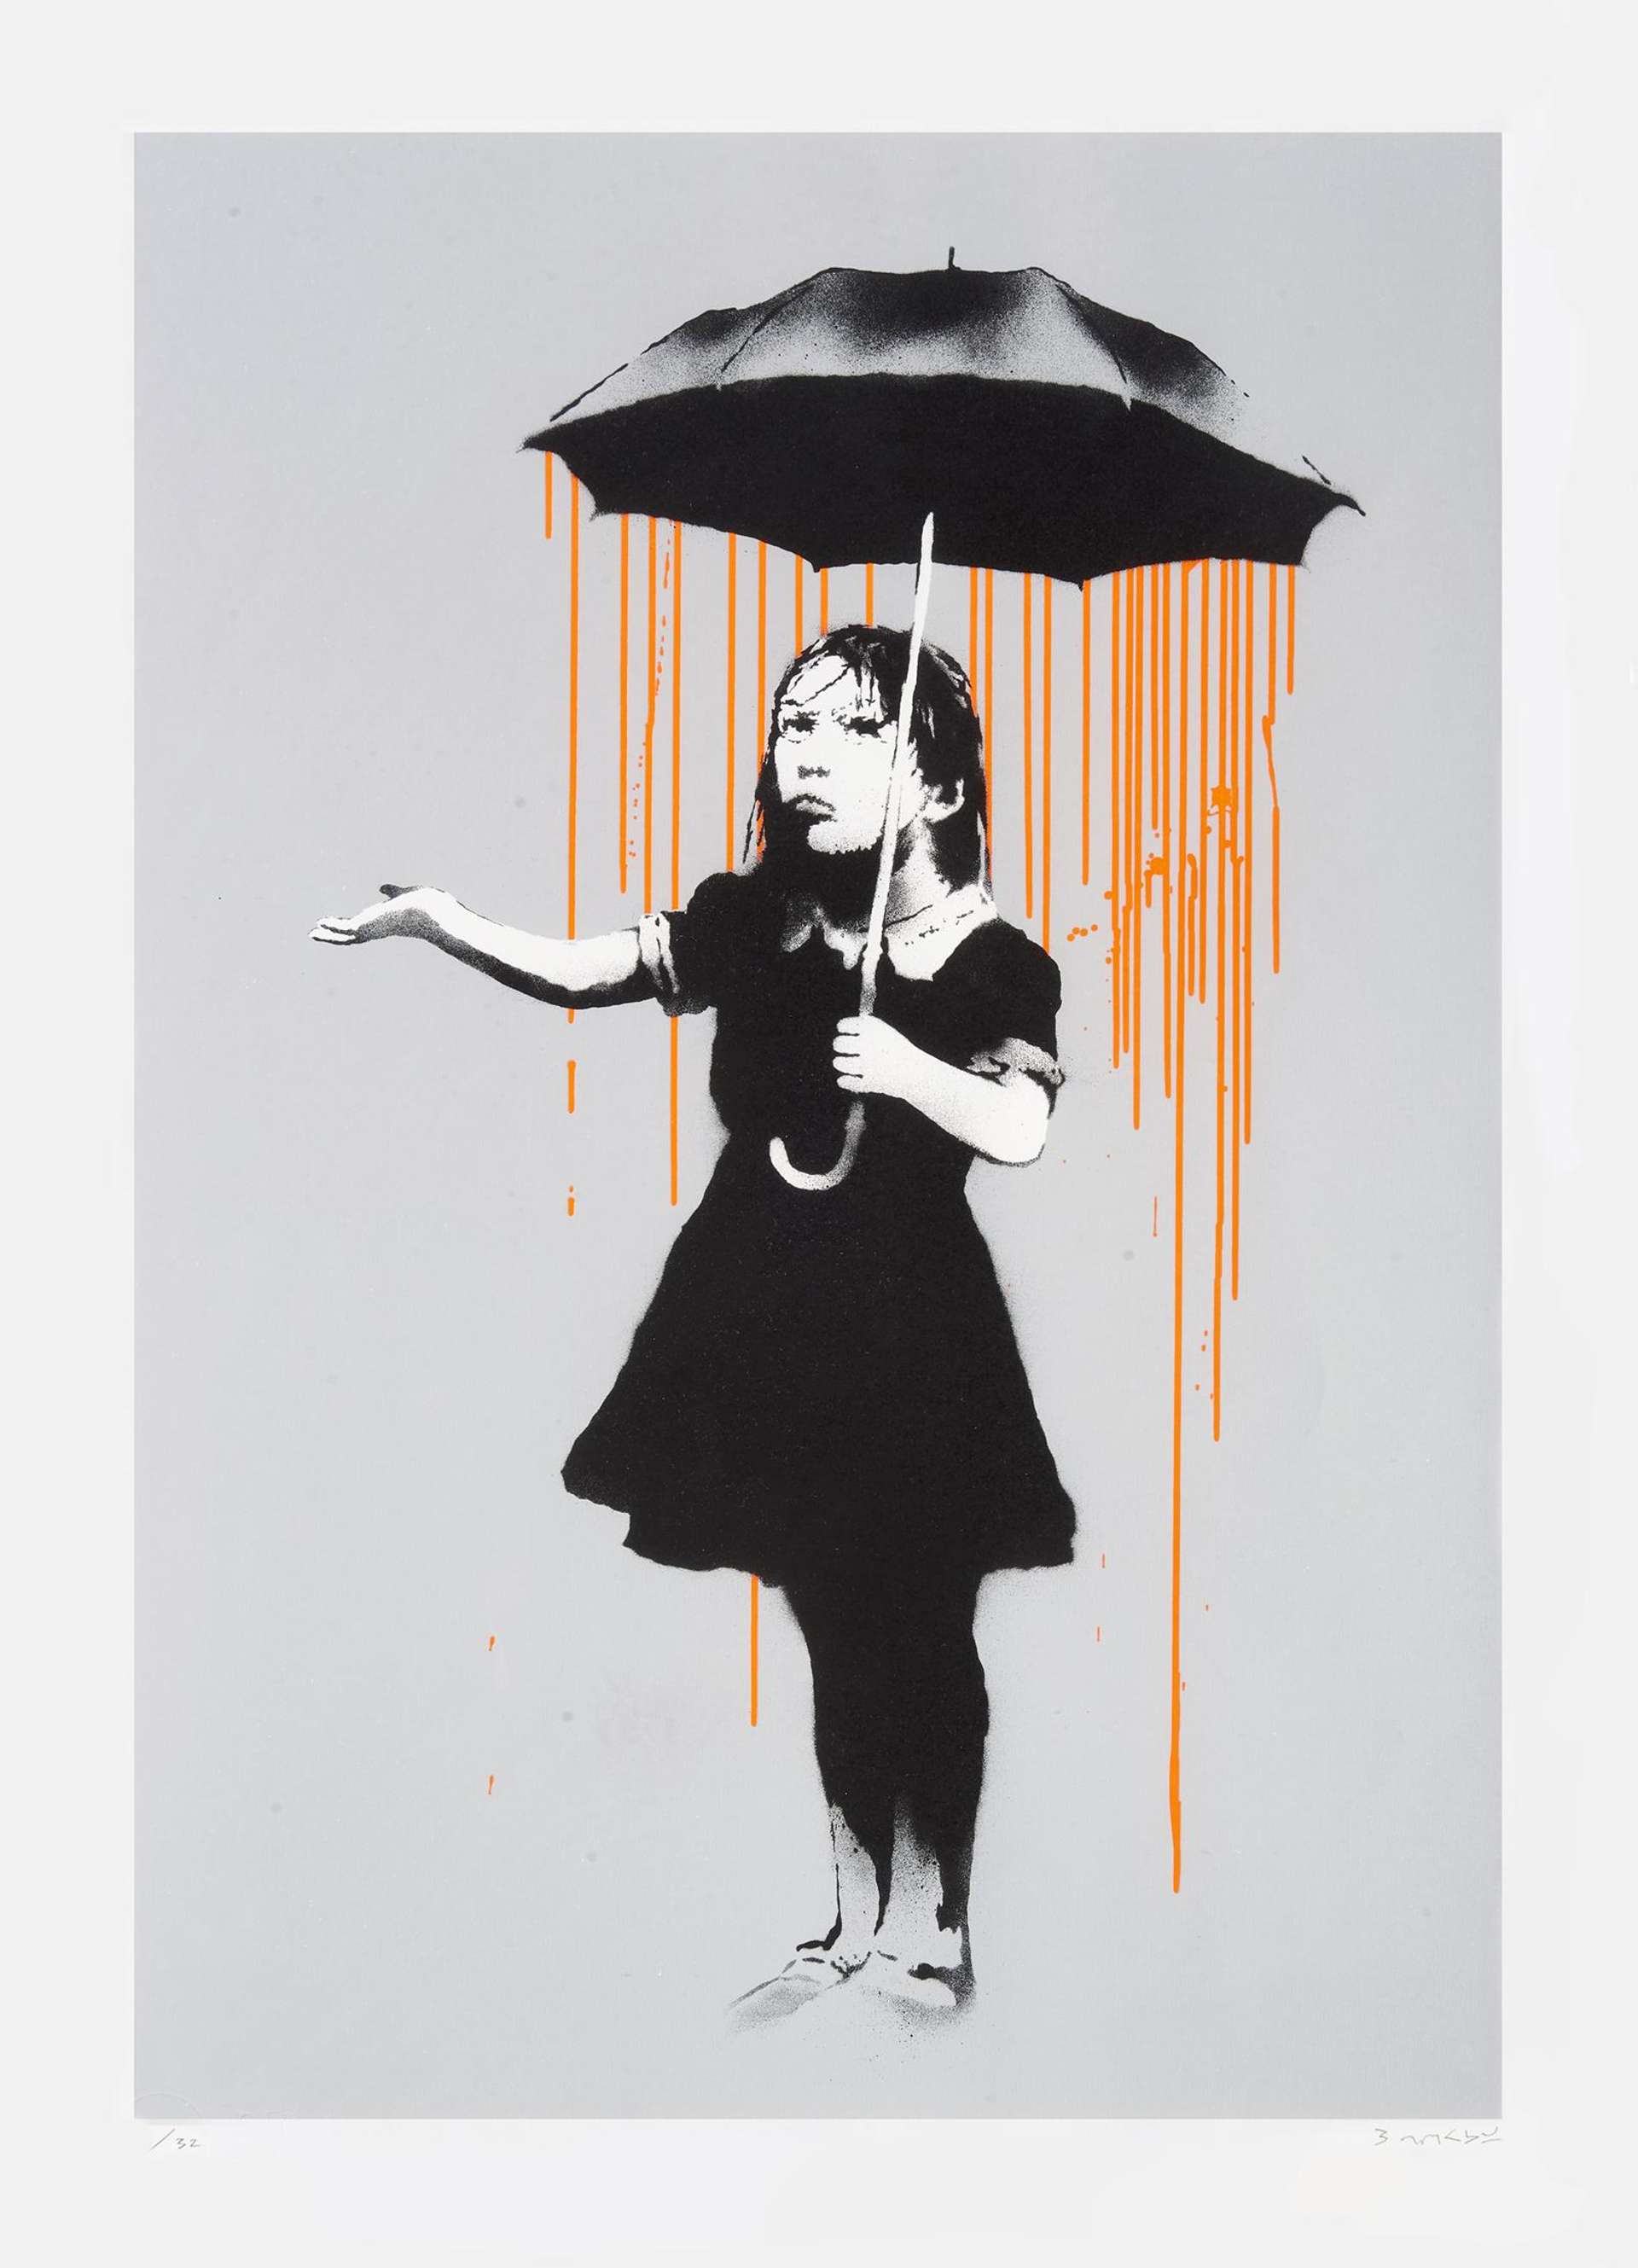 A little girl, spray painted in black against a grey background, with orange rain falling about her figure.